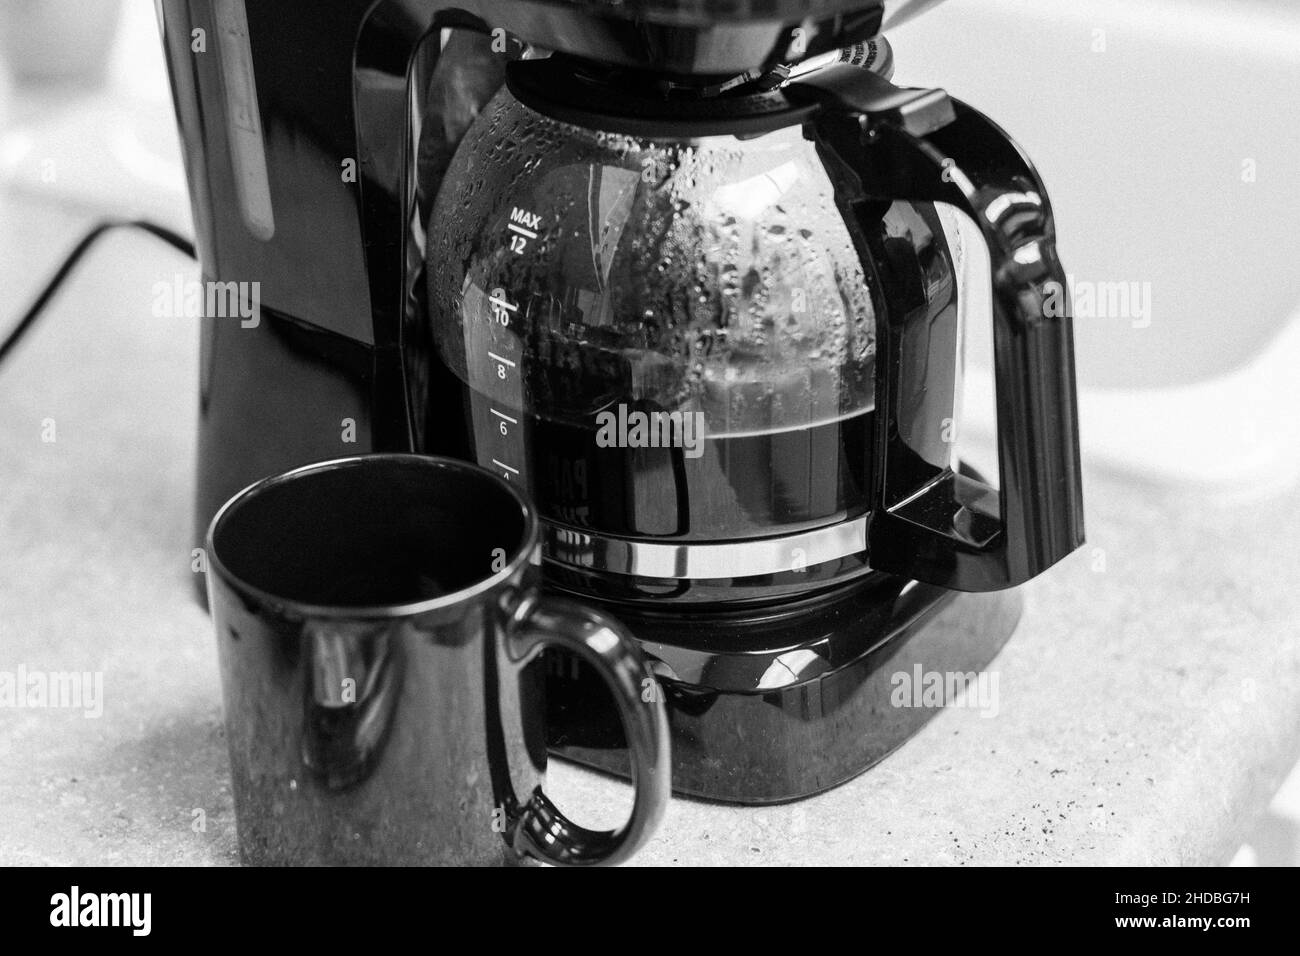 Grayscale top view of a coffee maker and a mug Stock Photo